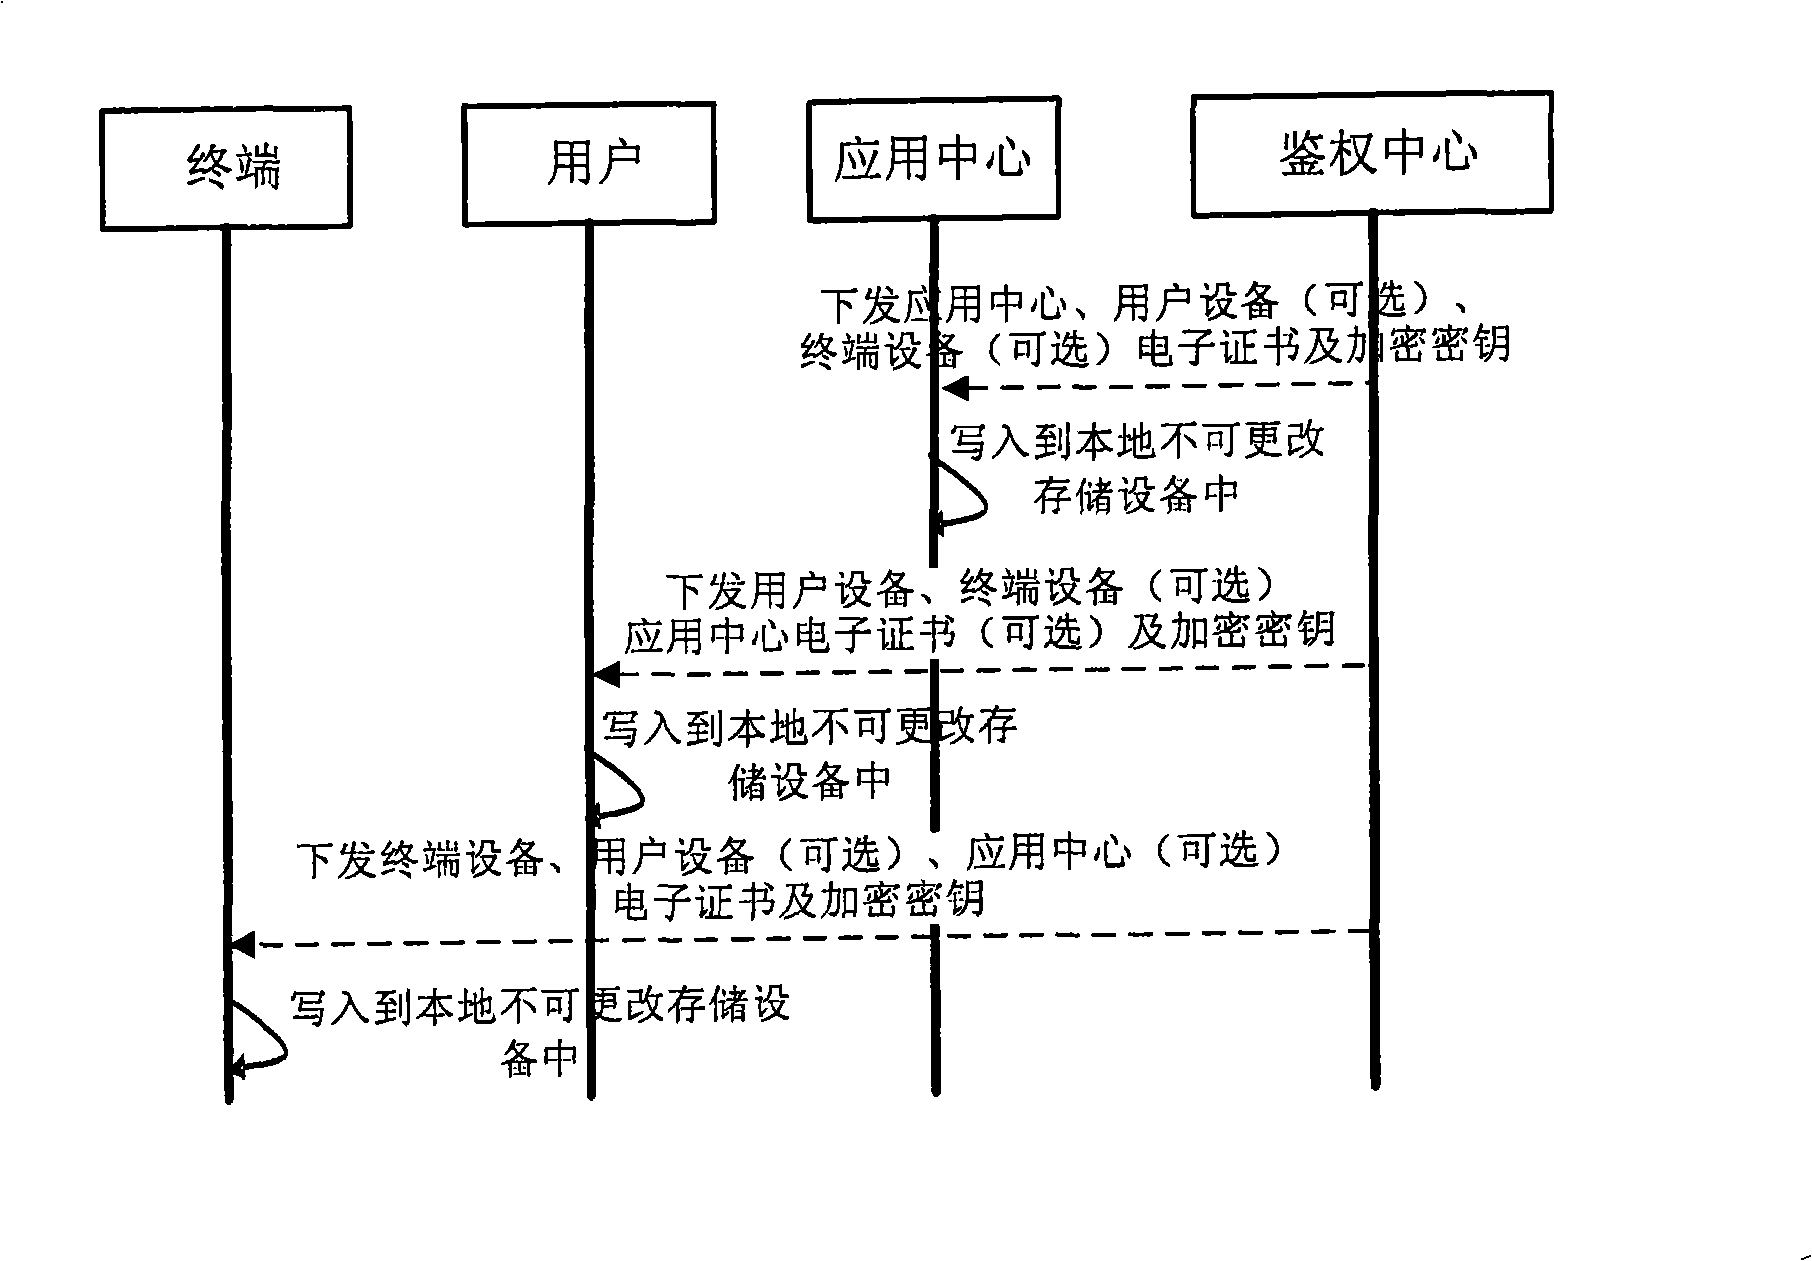 Multipart identification authentication method and system base on equipment